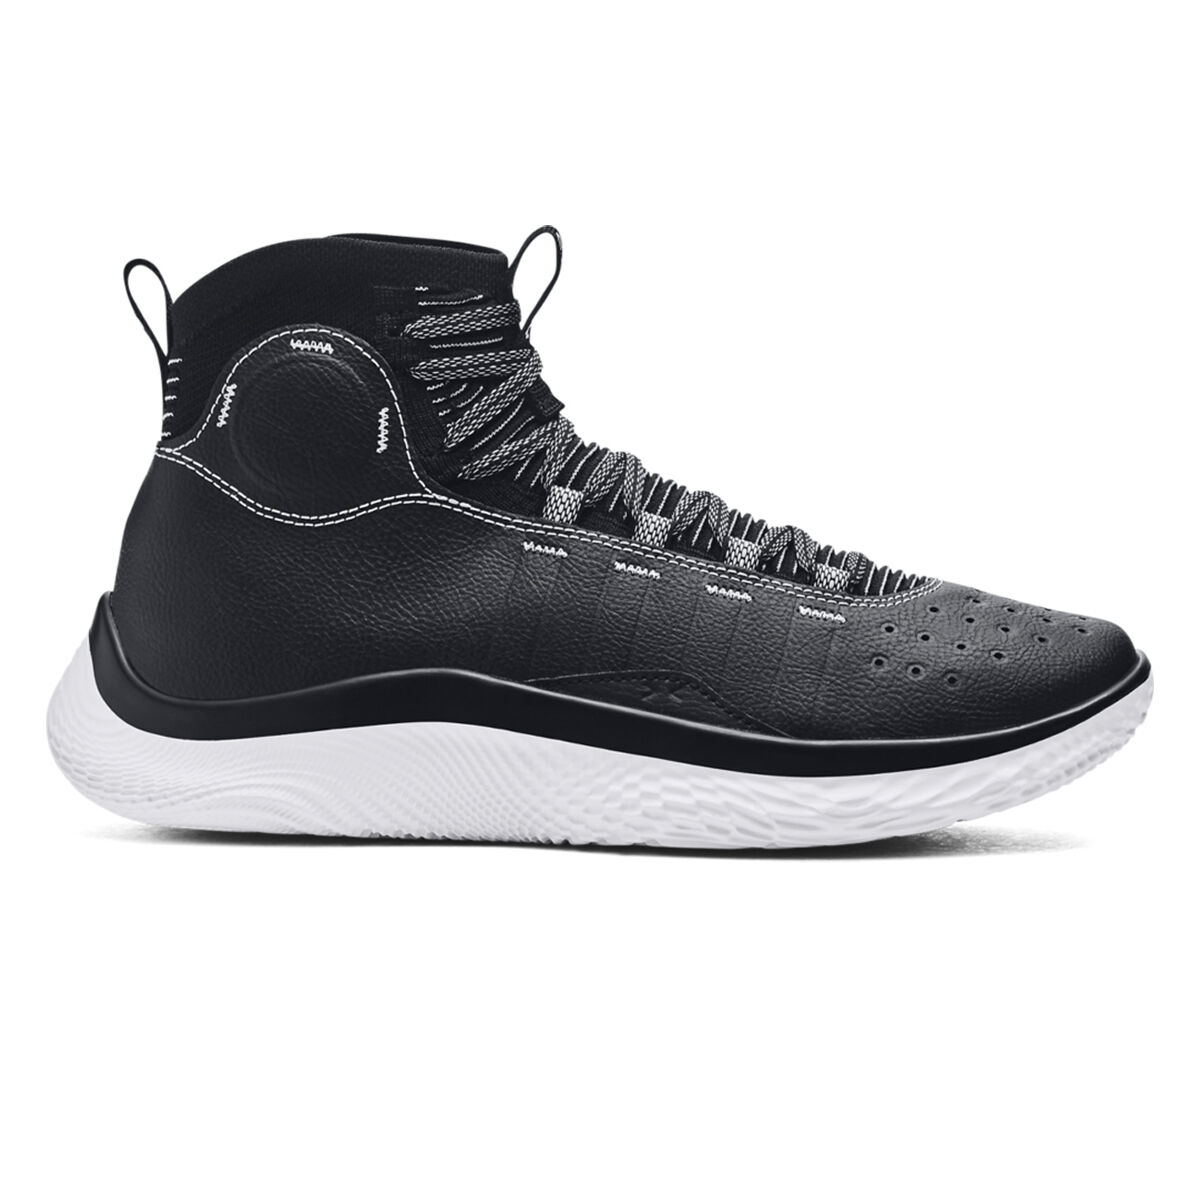 Under Armour Curry 4 FloTro Suit & Tie Basketball Shoes | Rebel Sport